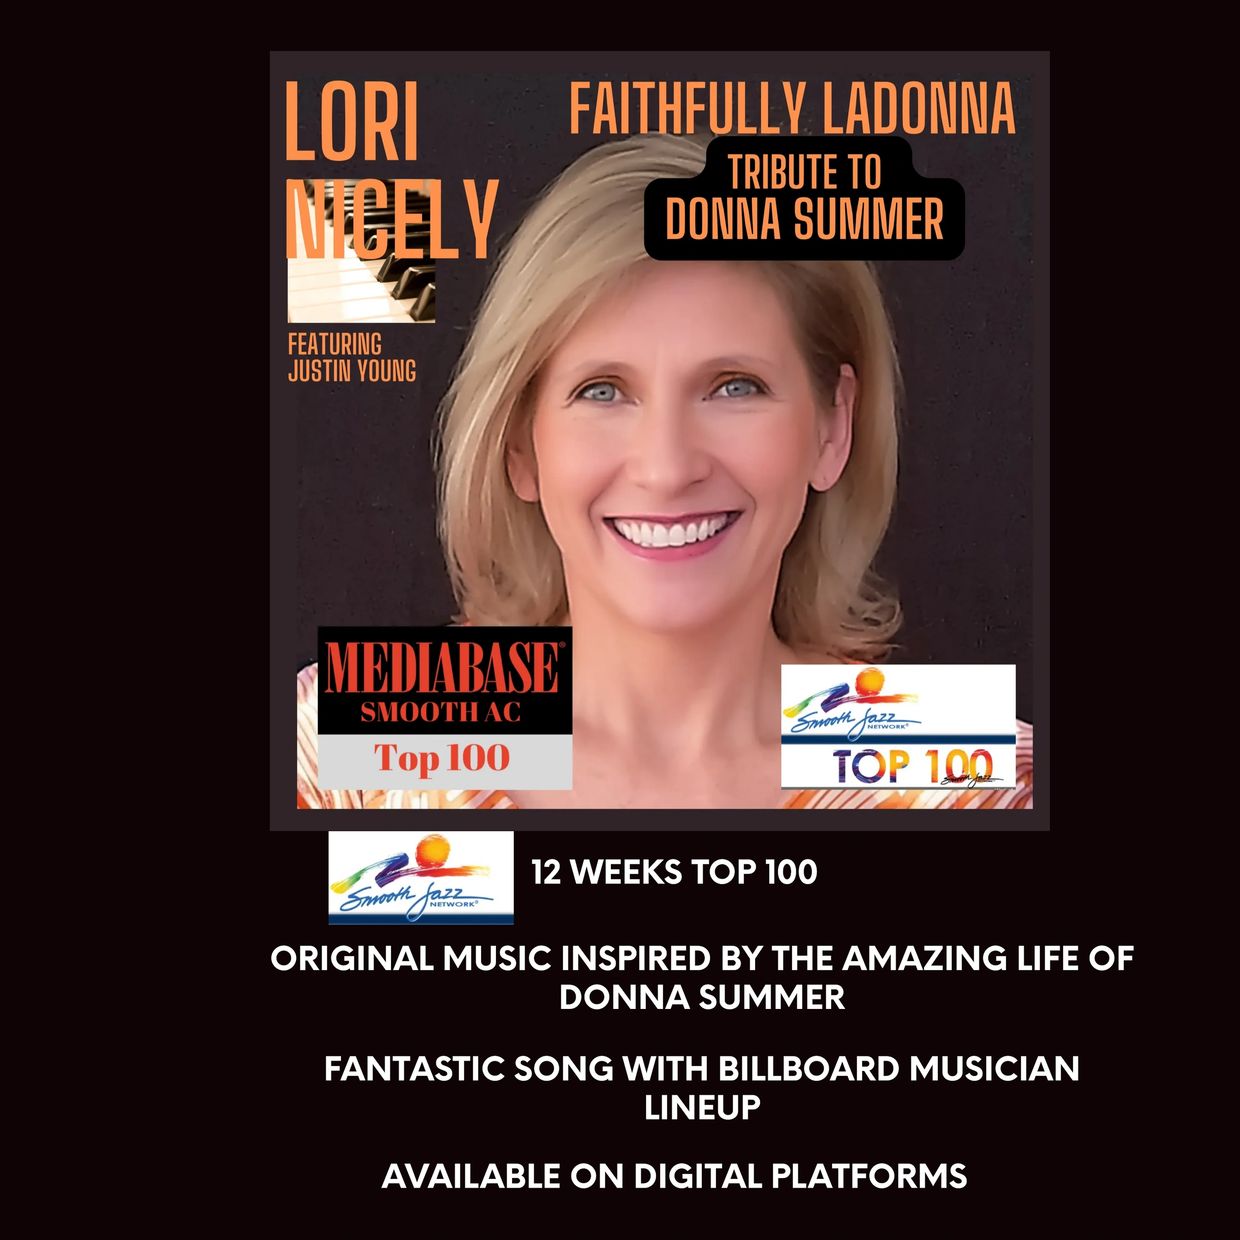 Lori Nicely album cover for "Faithfully LaDonna: Tribute to Donna Summer"